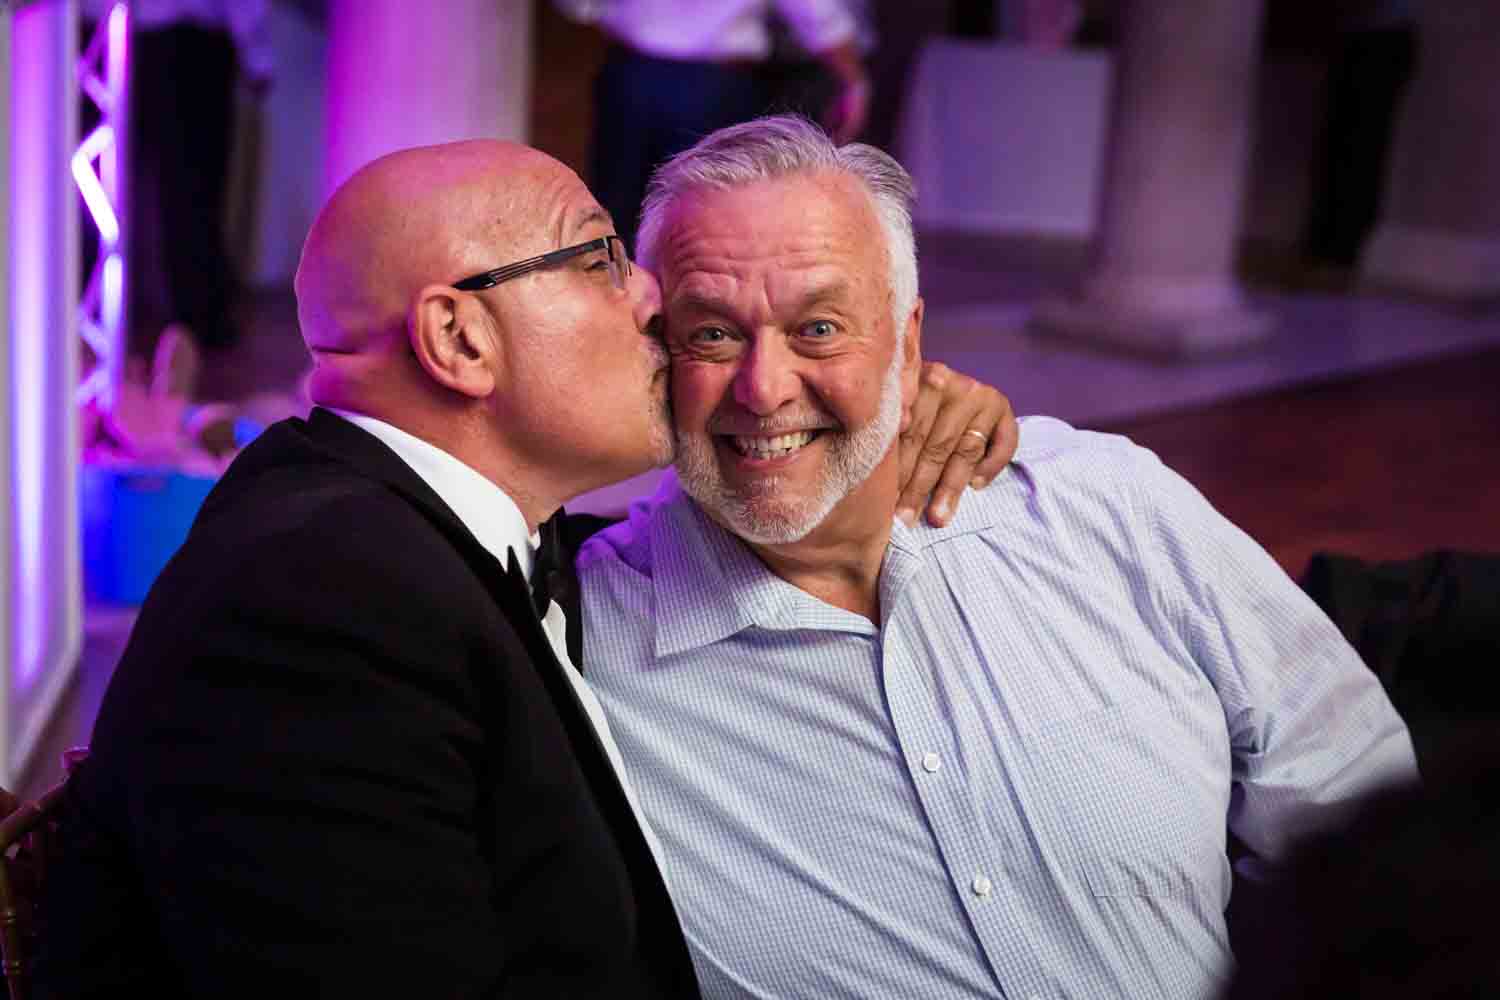 Father kissing guest on cheek for an article on Bronx Zoo wedding venue updates